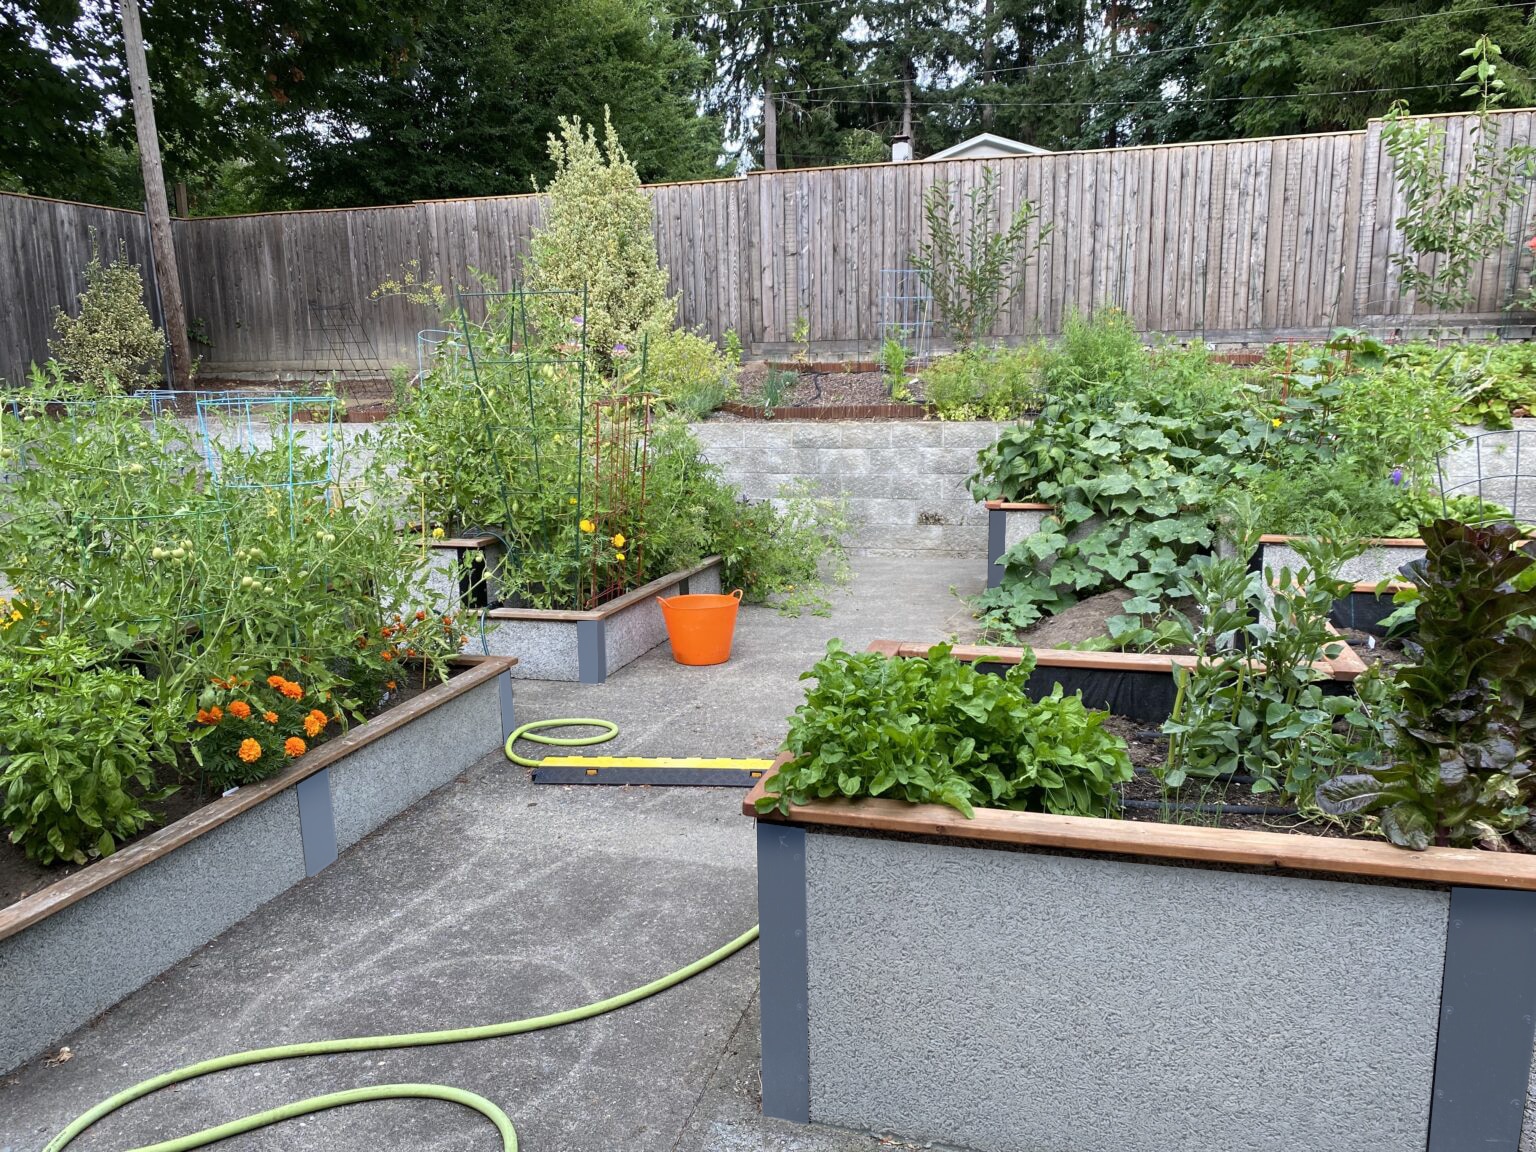 A community Garden on Concrete with a smoke grey color with Durable GreenBed Raised Garden Beds